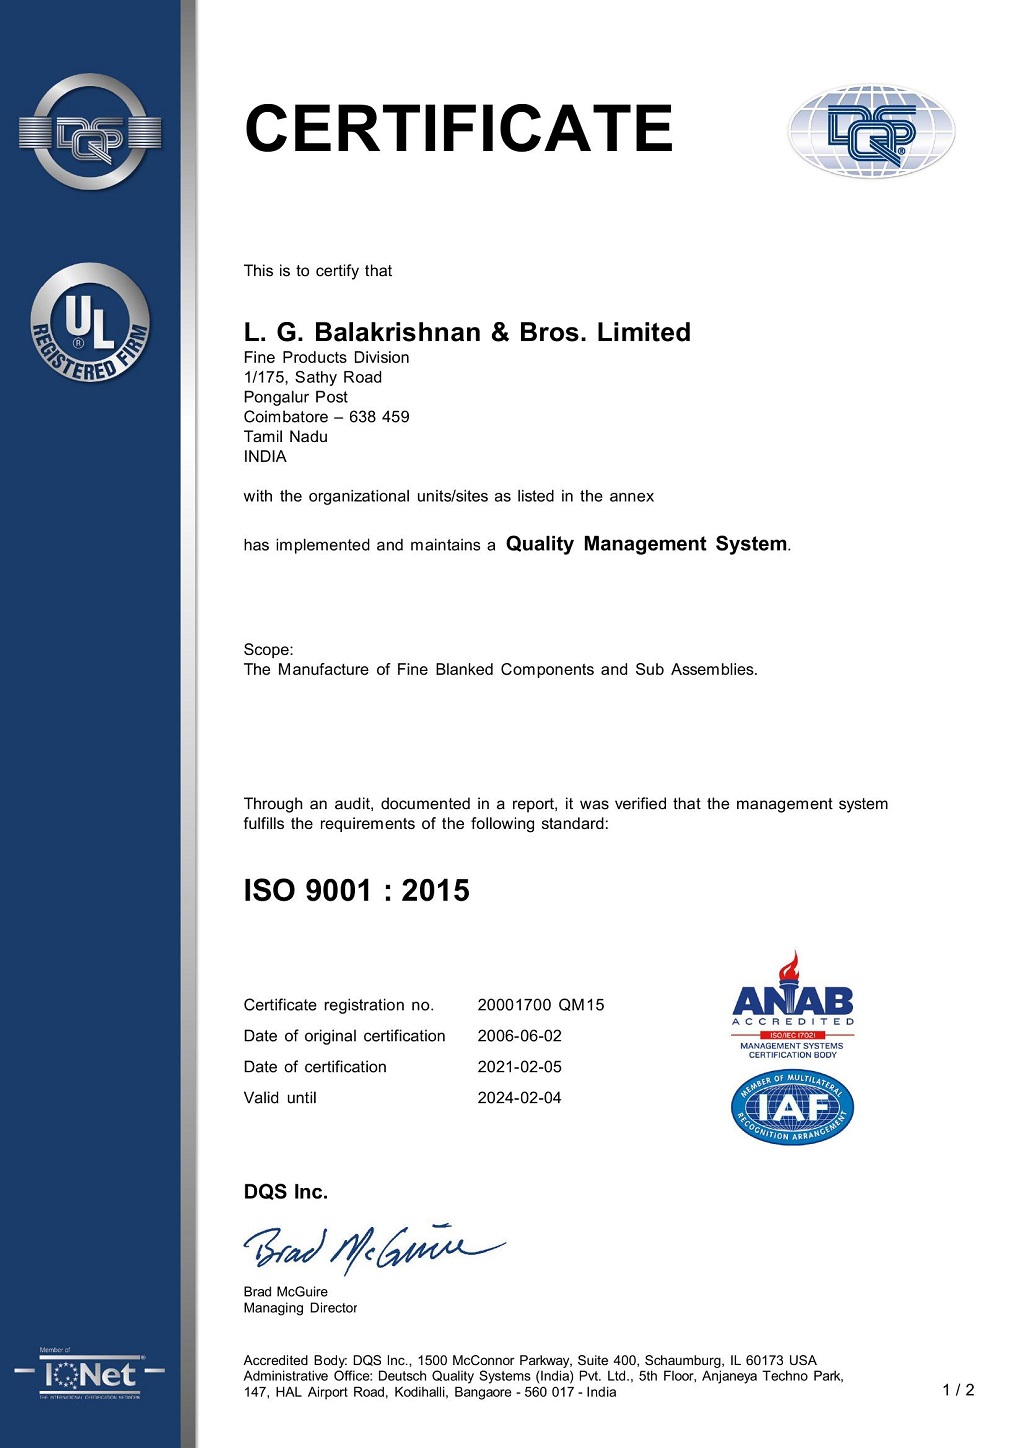 L.G.B FPD FPD2 PLANT ISO 9001 2015